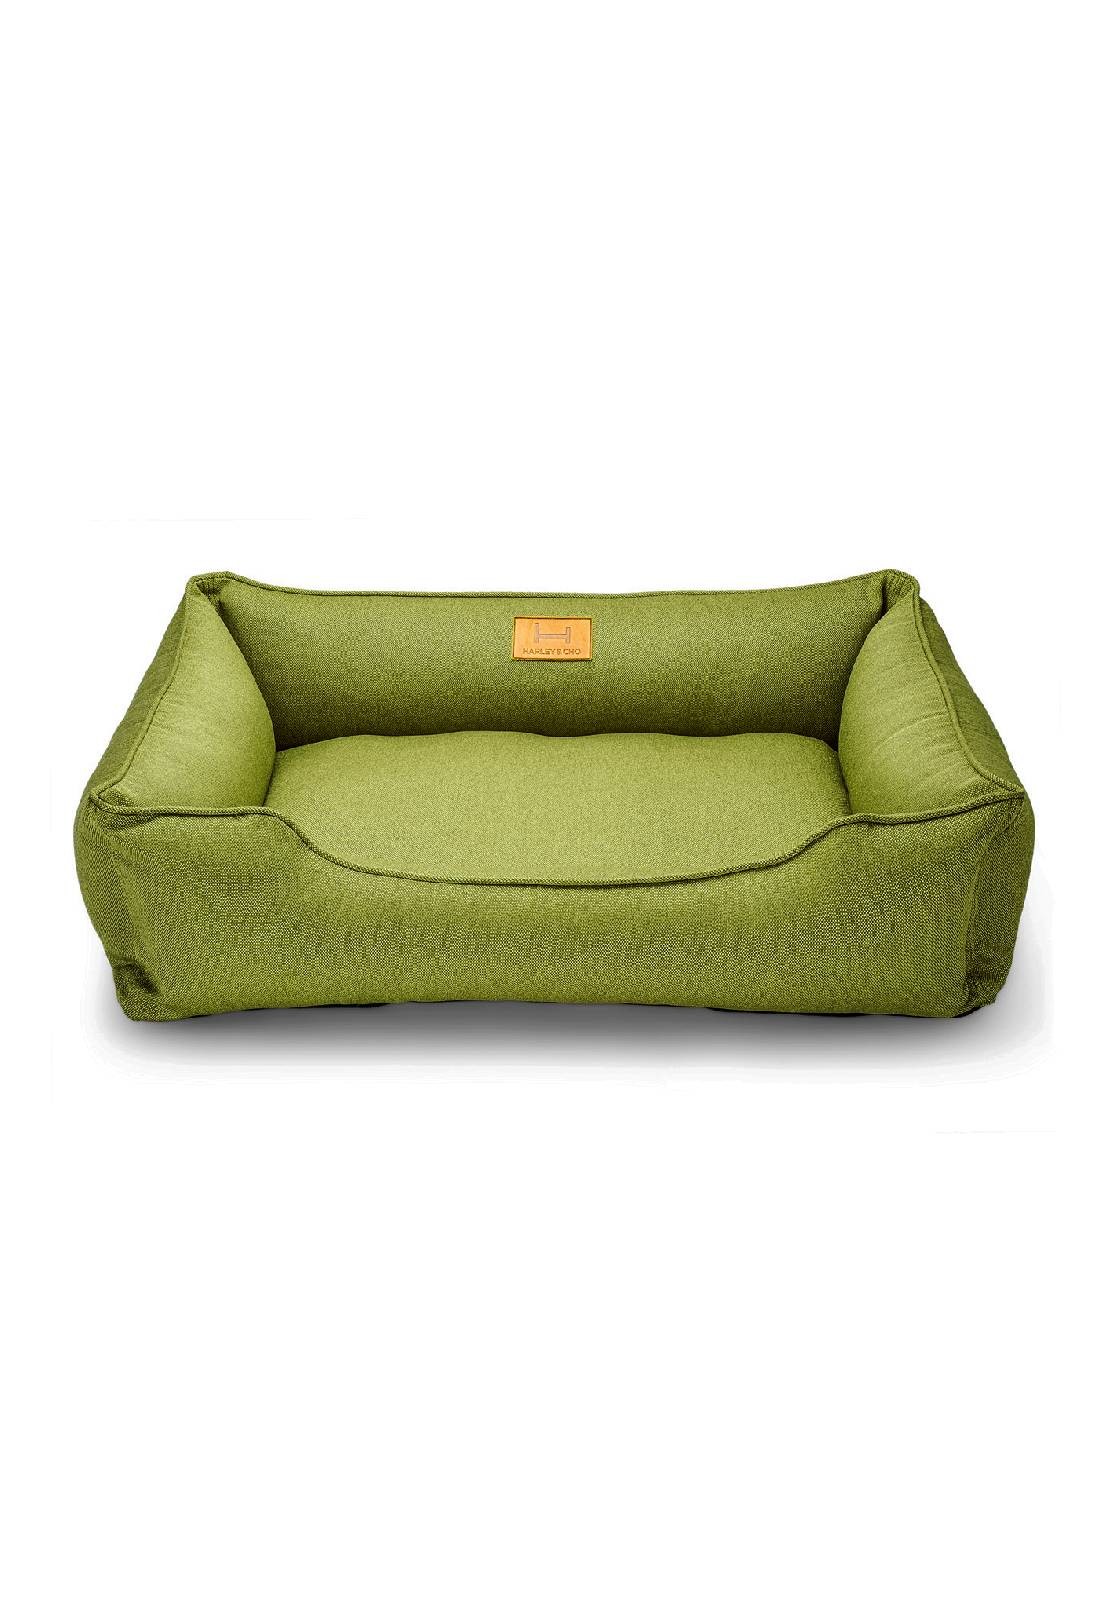 Pet bed Harley and Cho Dreamer Olive S (60x45 cm) 3102677